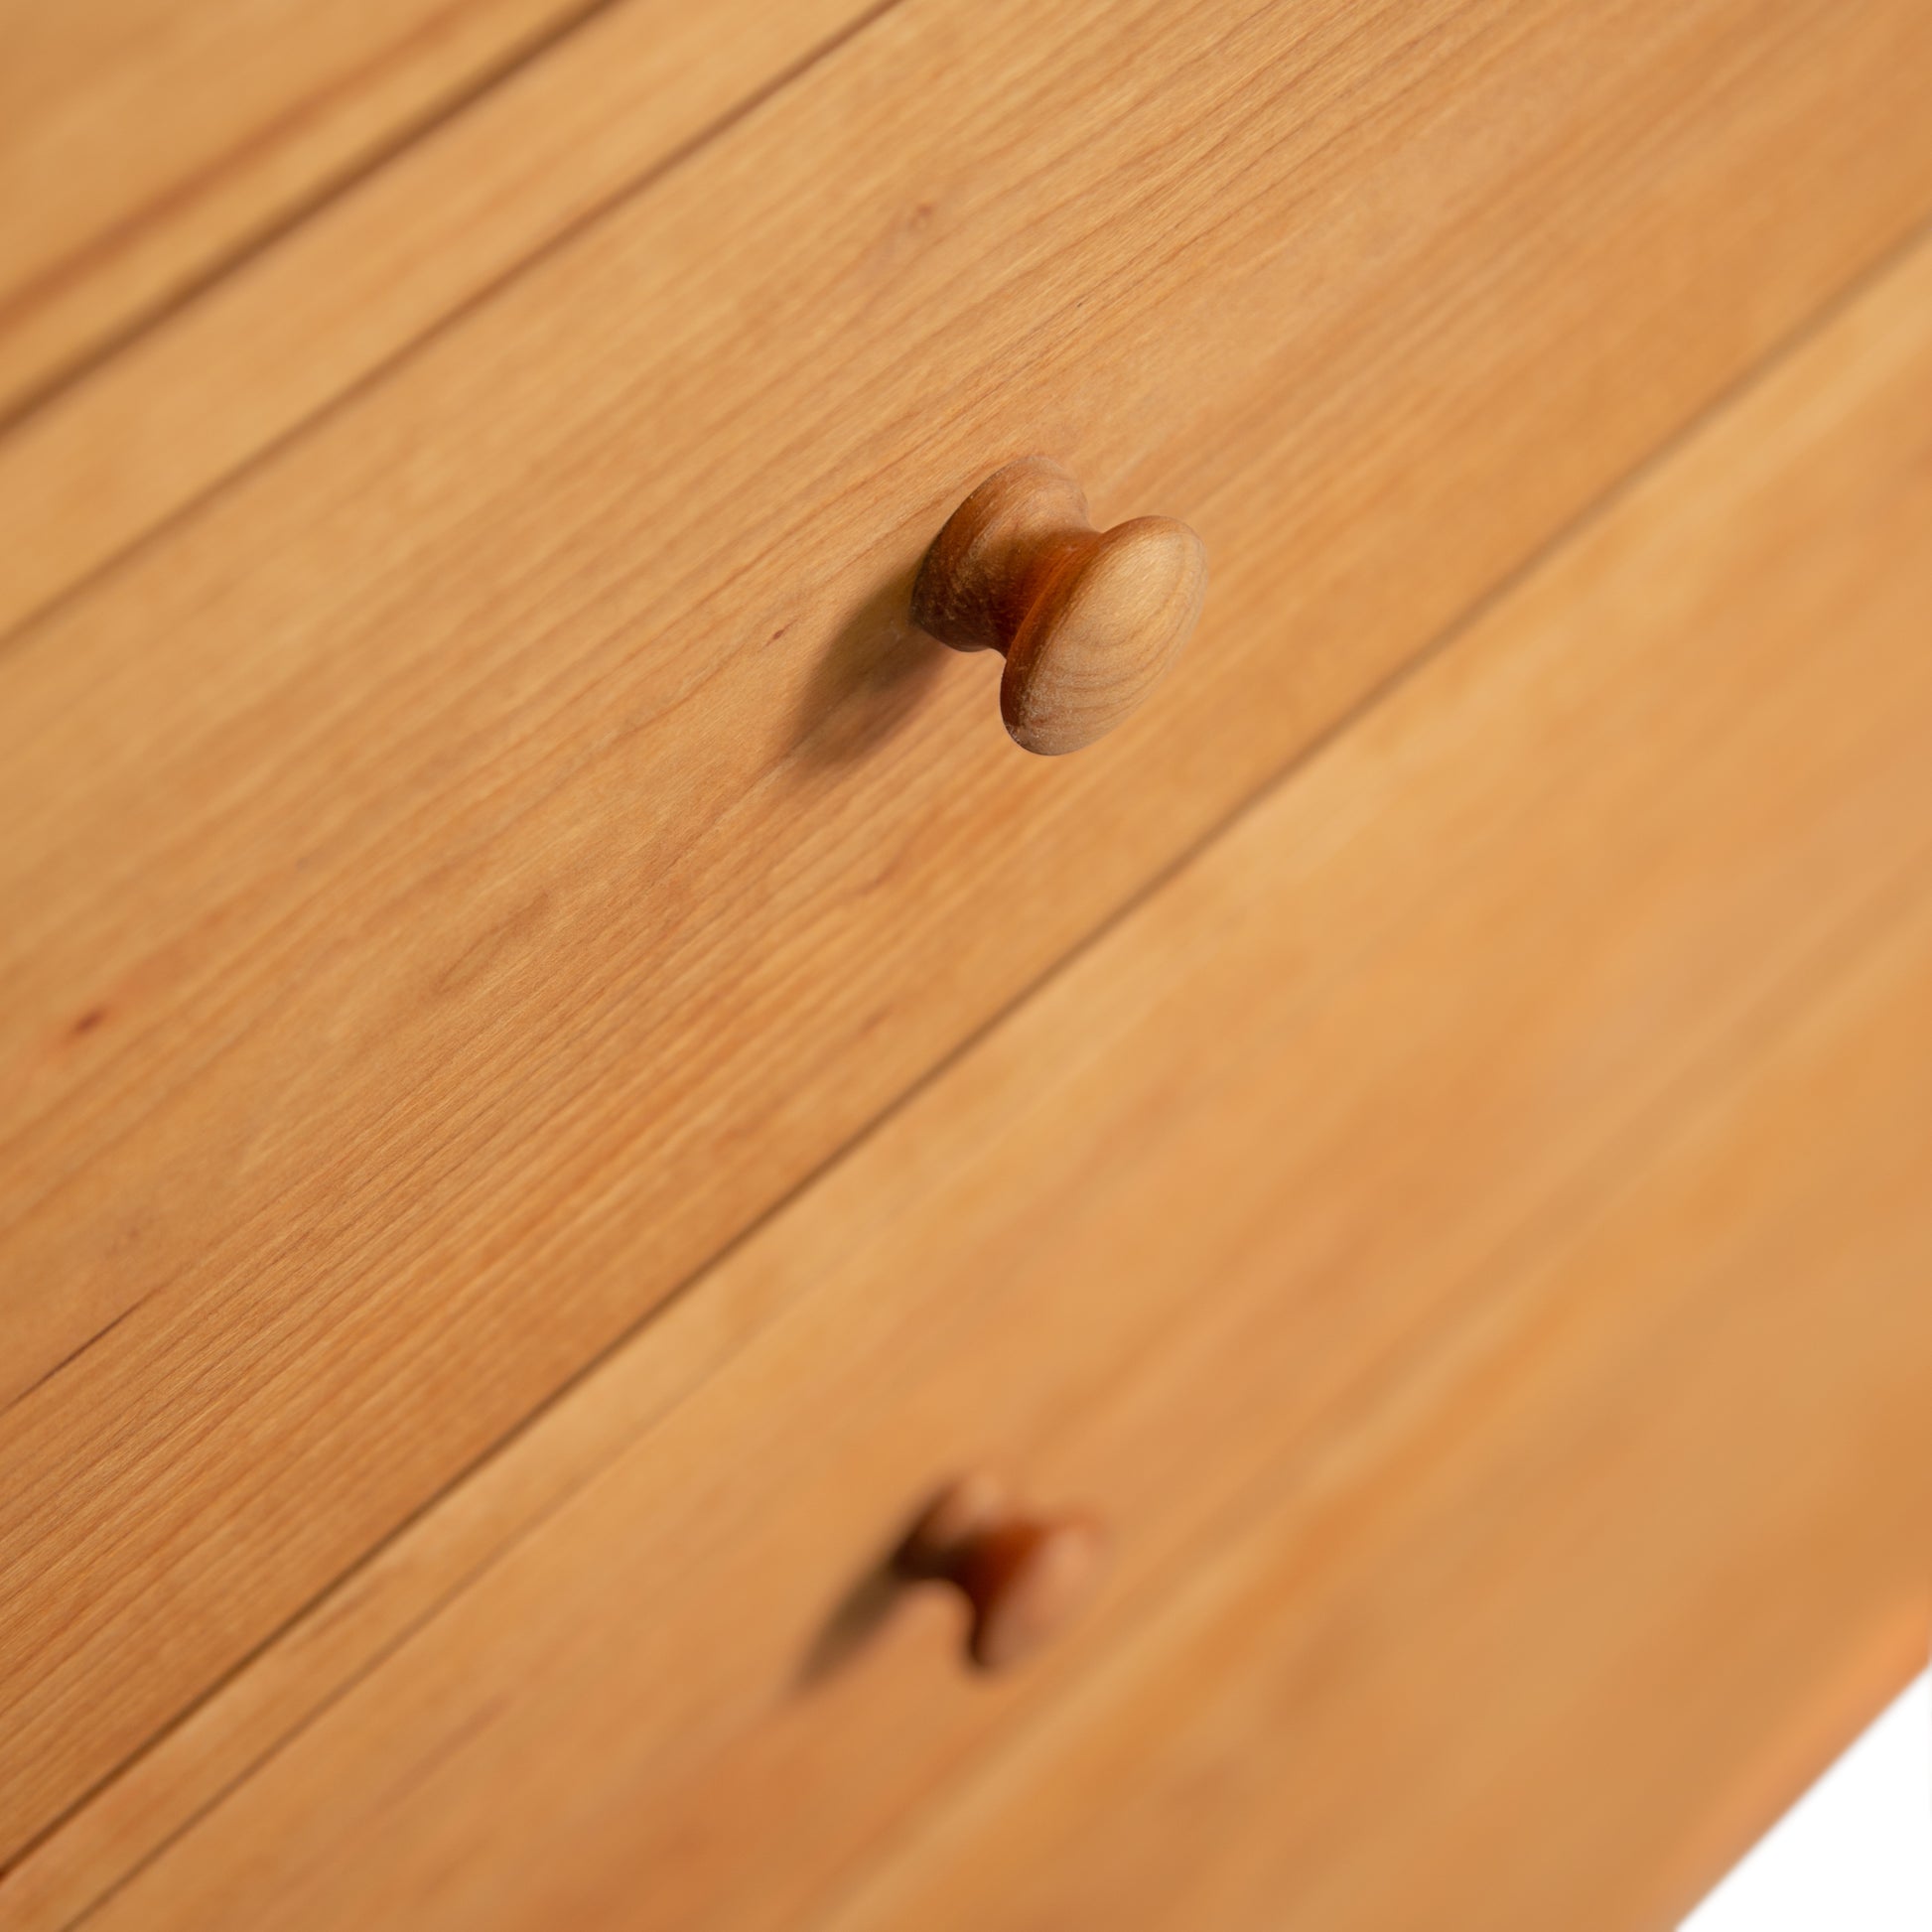 A close-up of a Vermont Furniture Designs Burlington Shaker 6-Drawer Chest with a round knob.